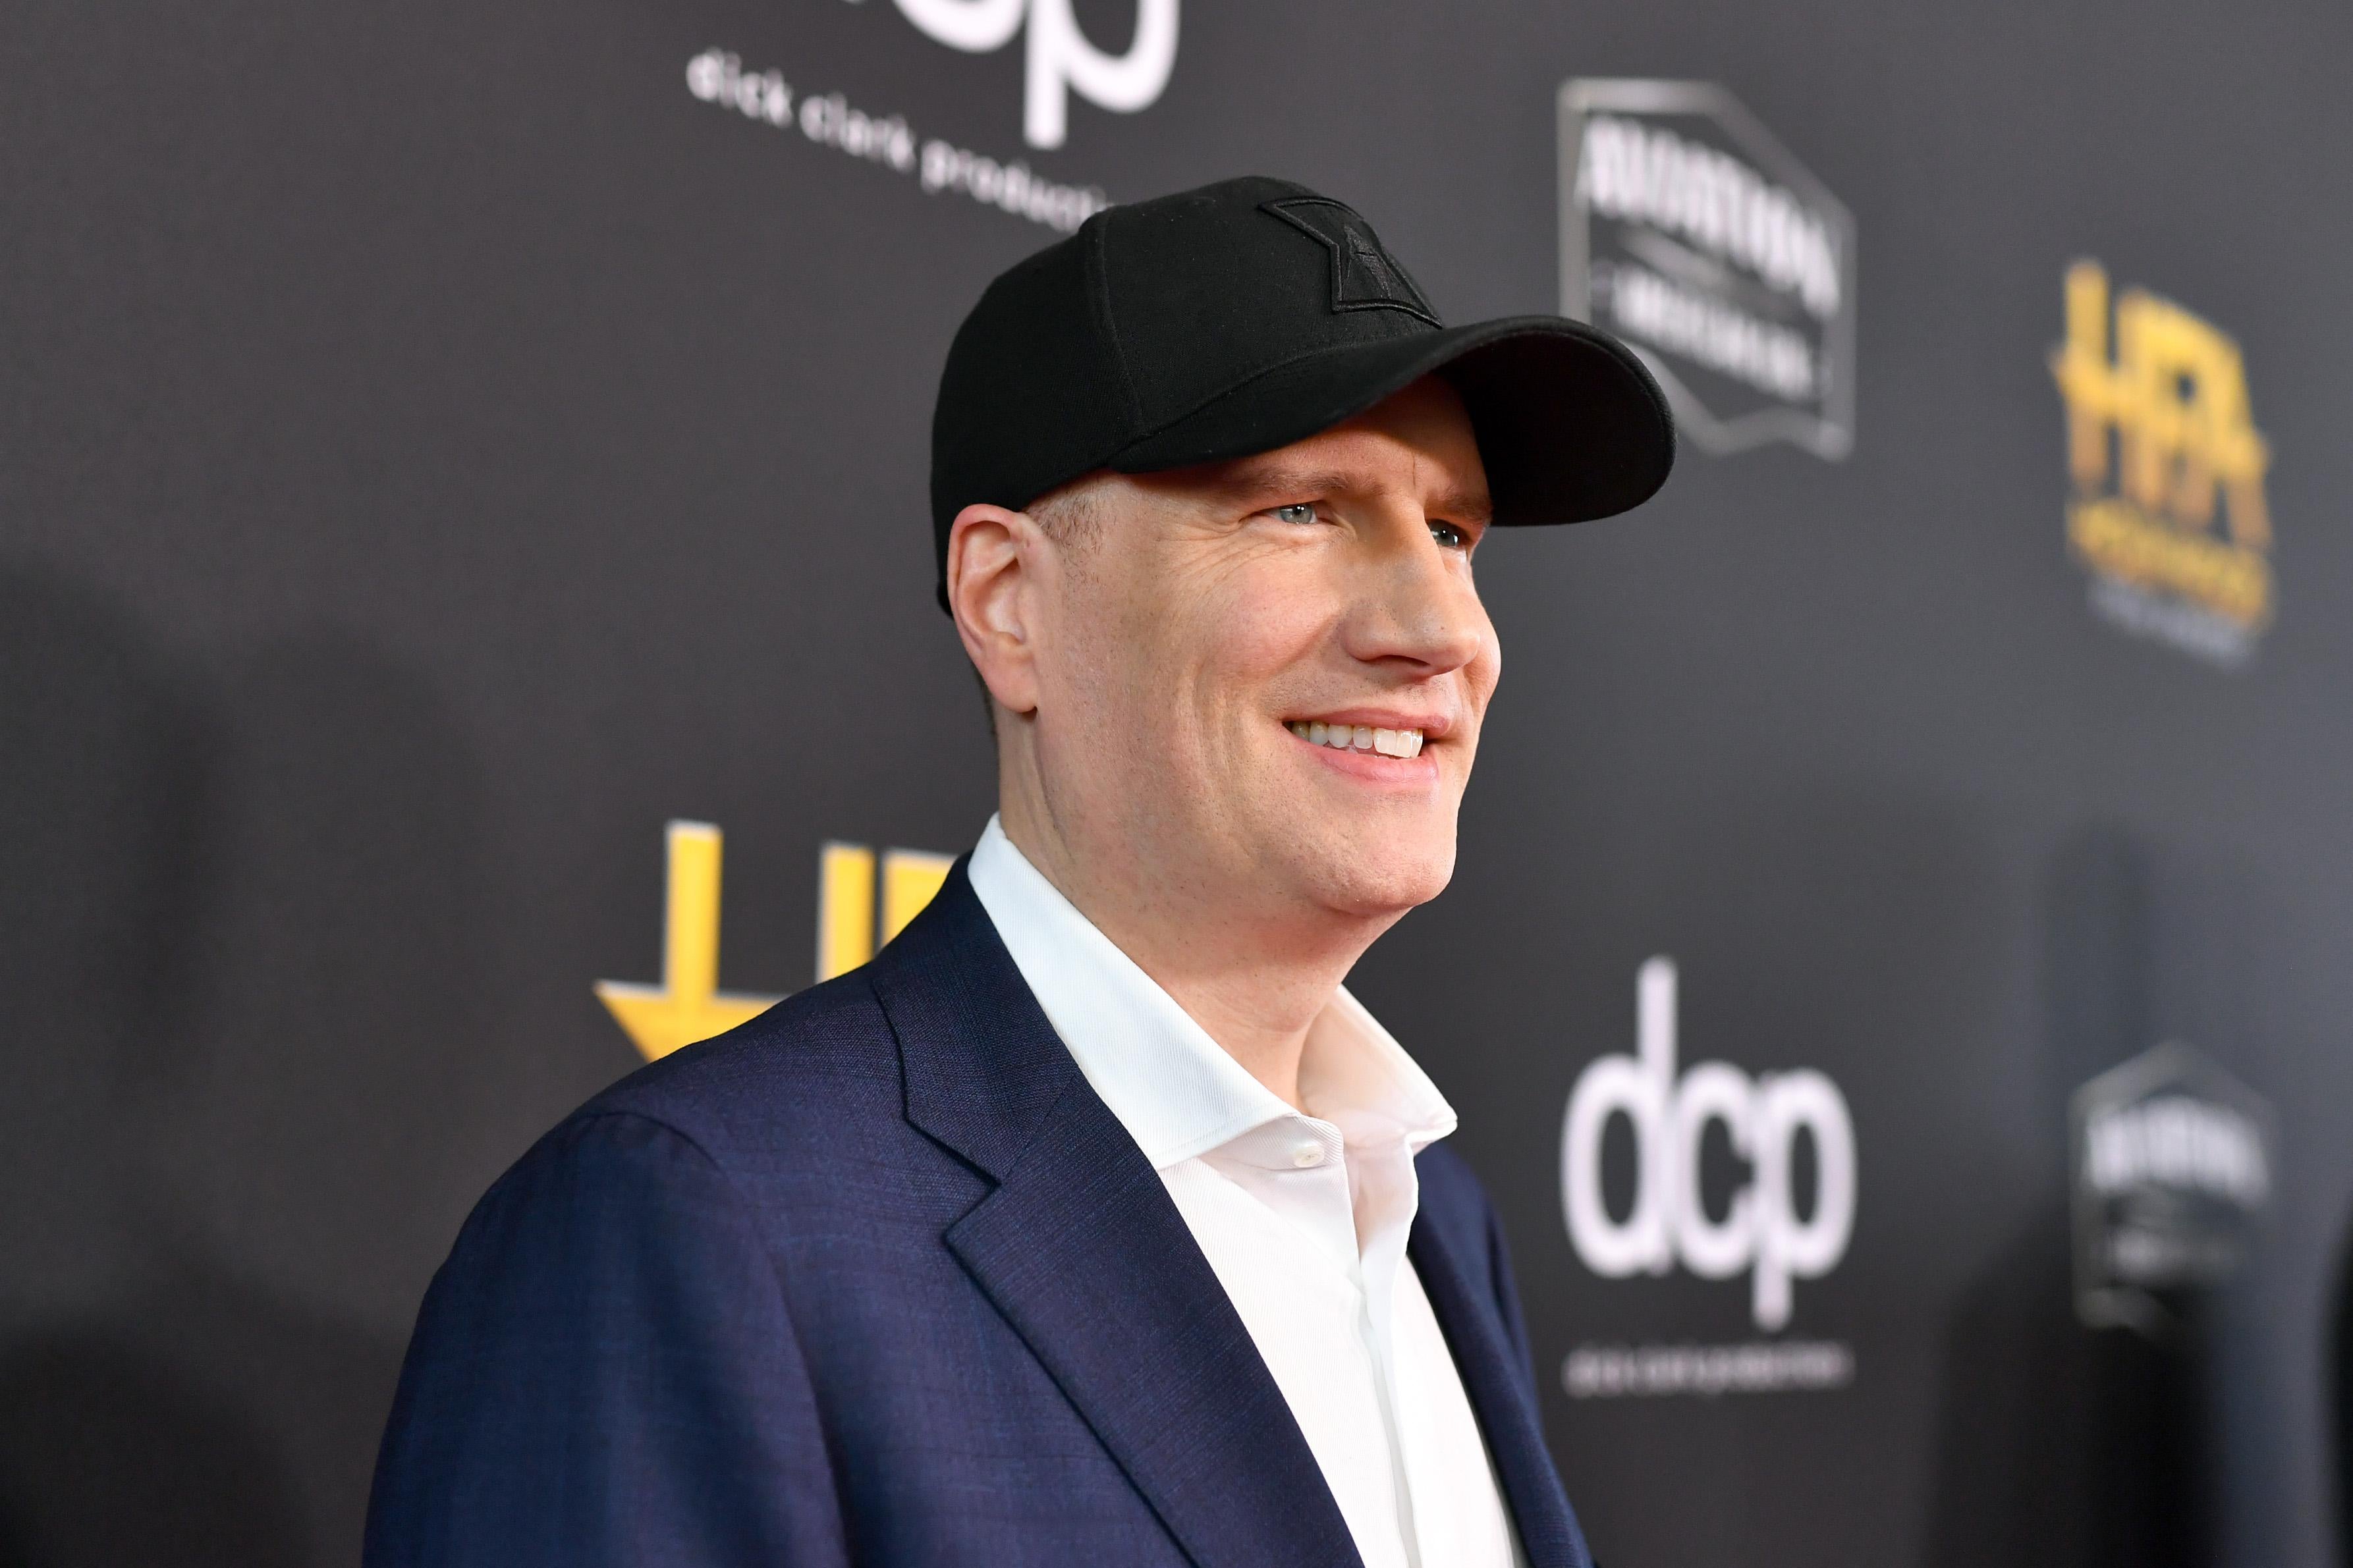 Kevin Feige on a red carpet, wearing a baseball hat.